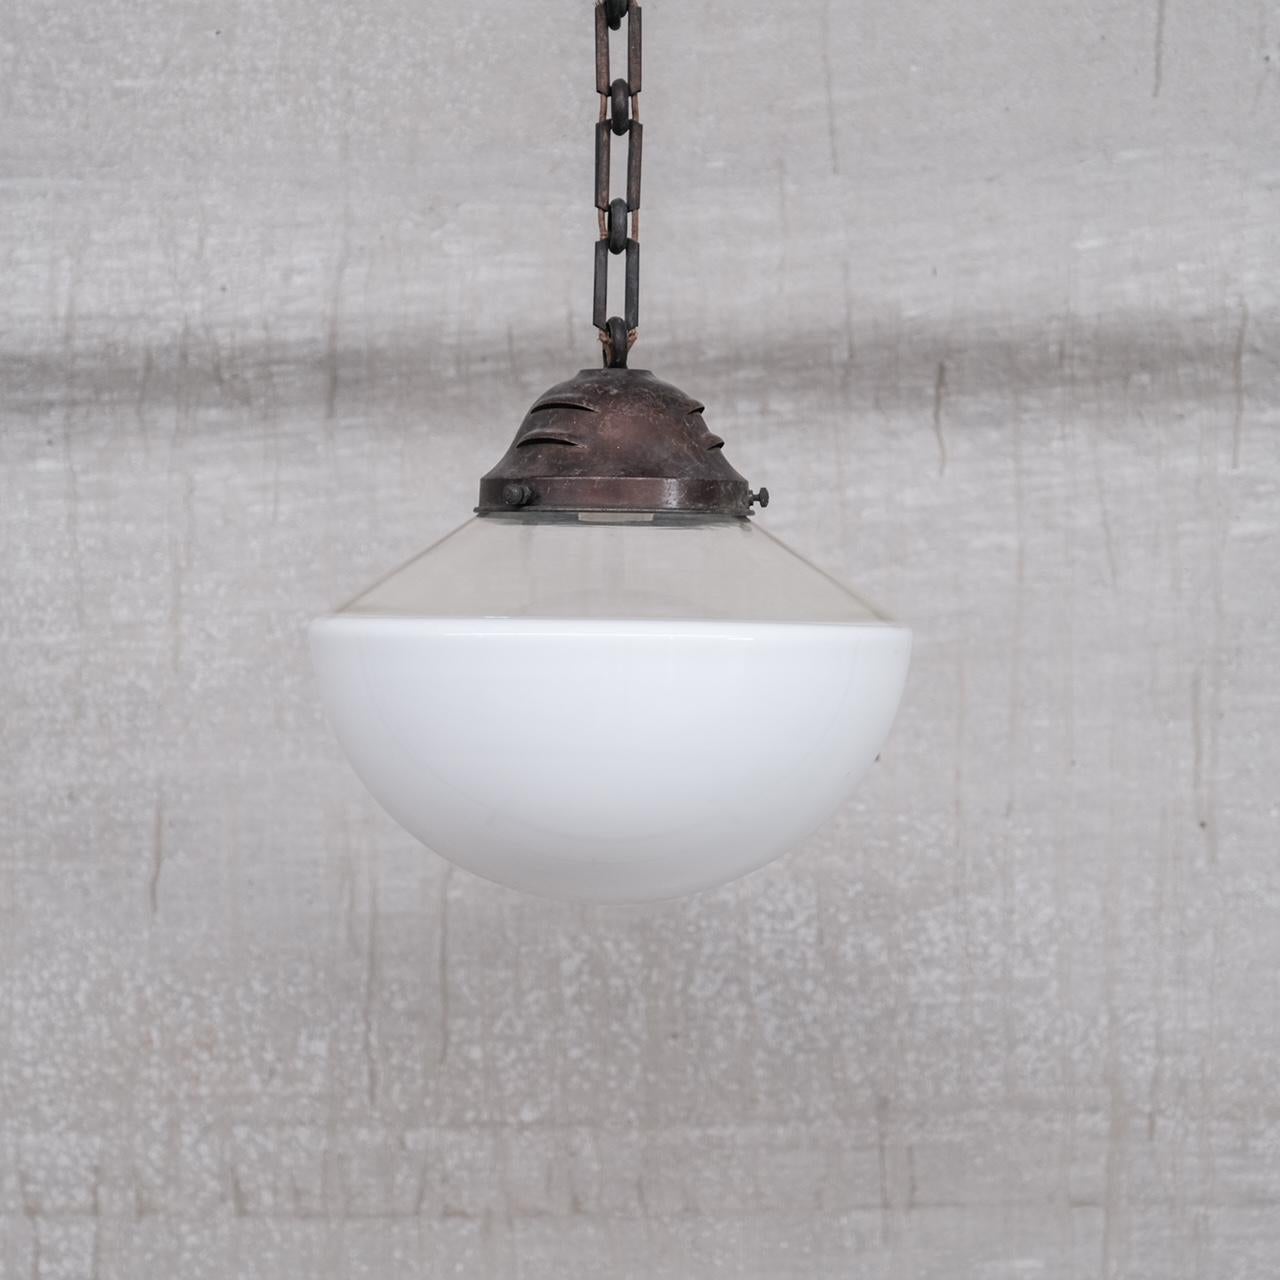 A good quality two tone pendant light. 

France, c1950s. 

Opaline glass base, clear top, all one glass shade. 

Naturally patinated metal gallery, likely brass. 

Some original chain provided, no ceiling rose was retained. 

Since